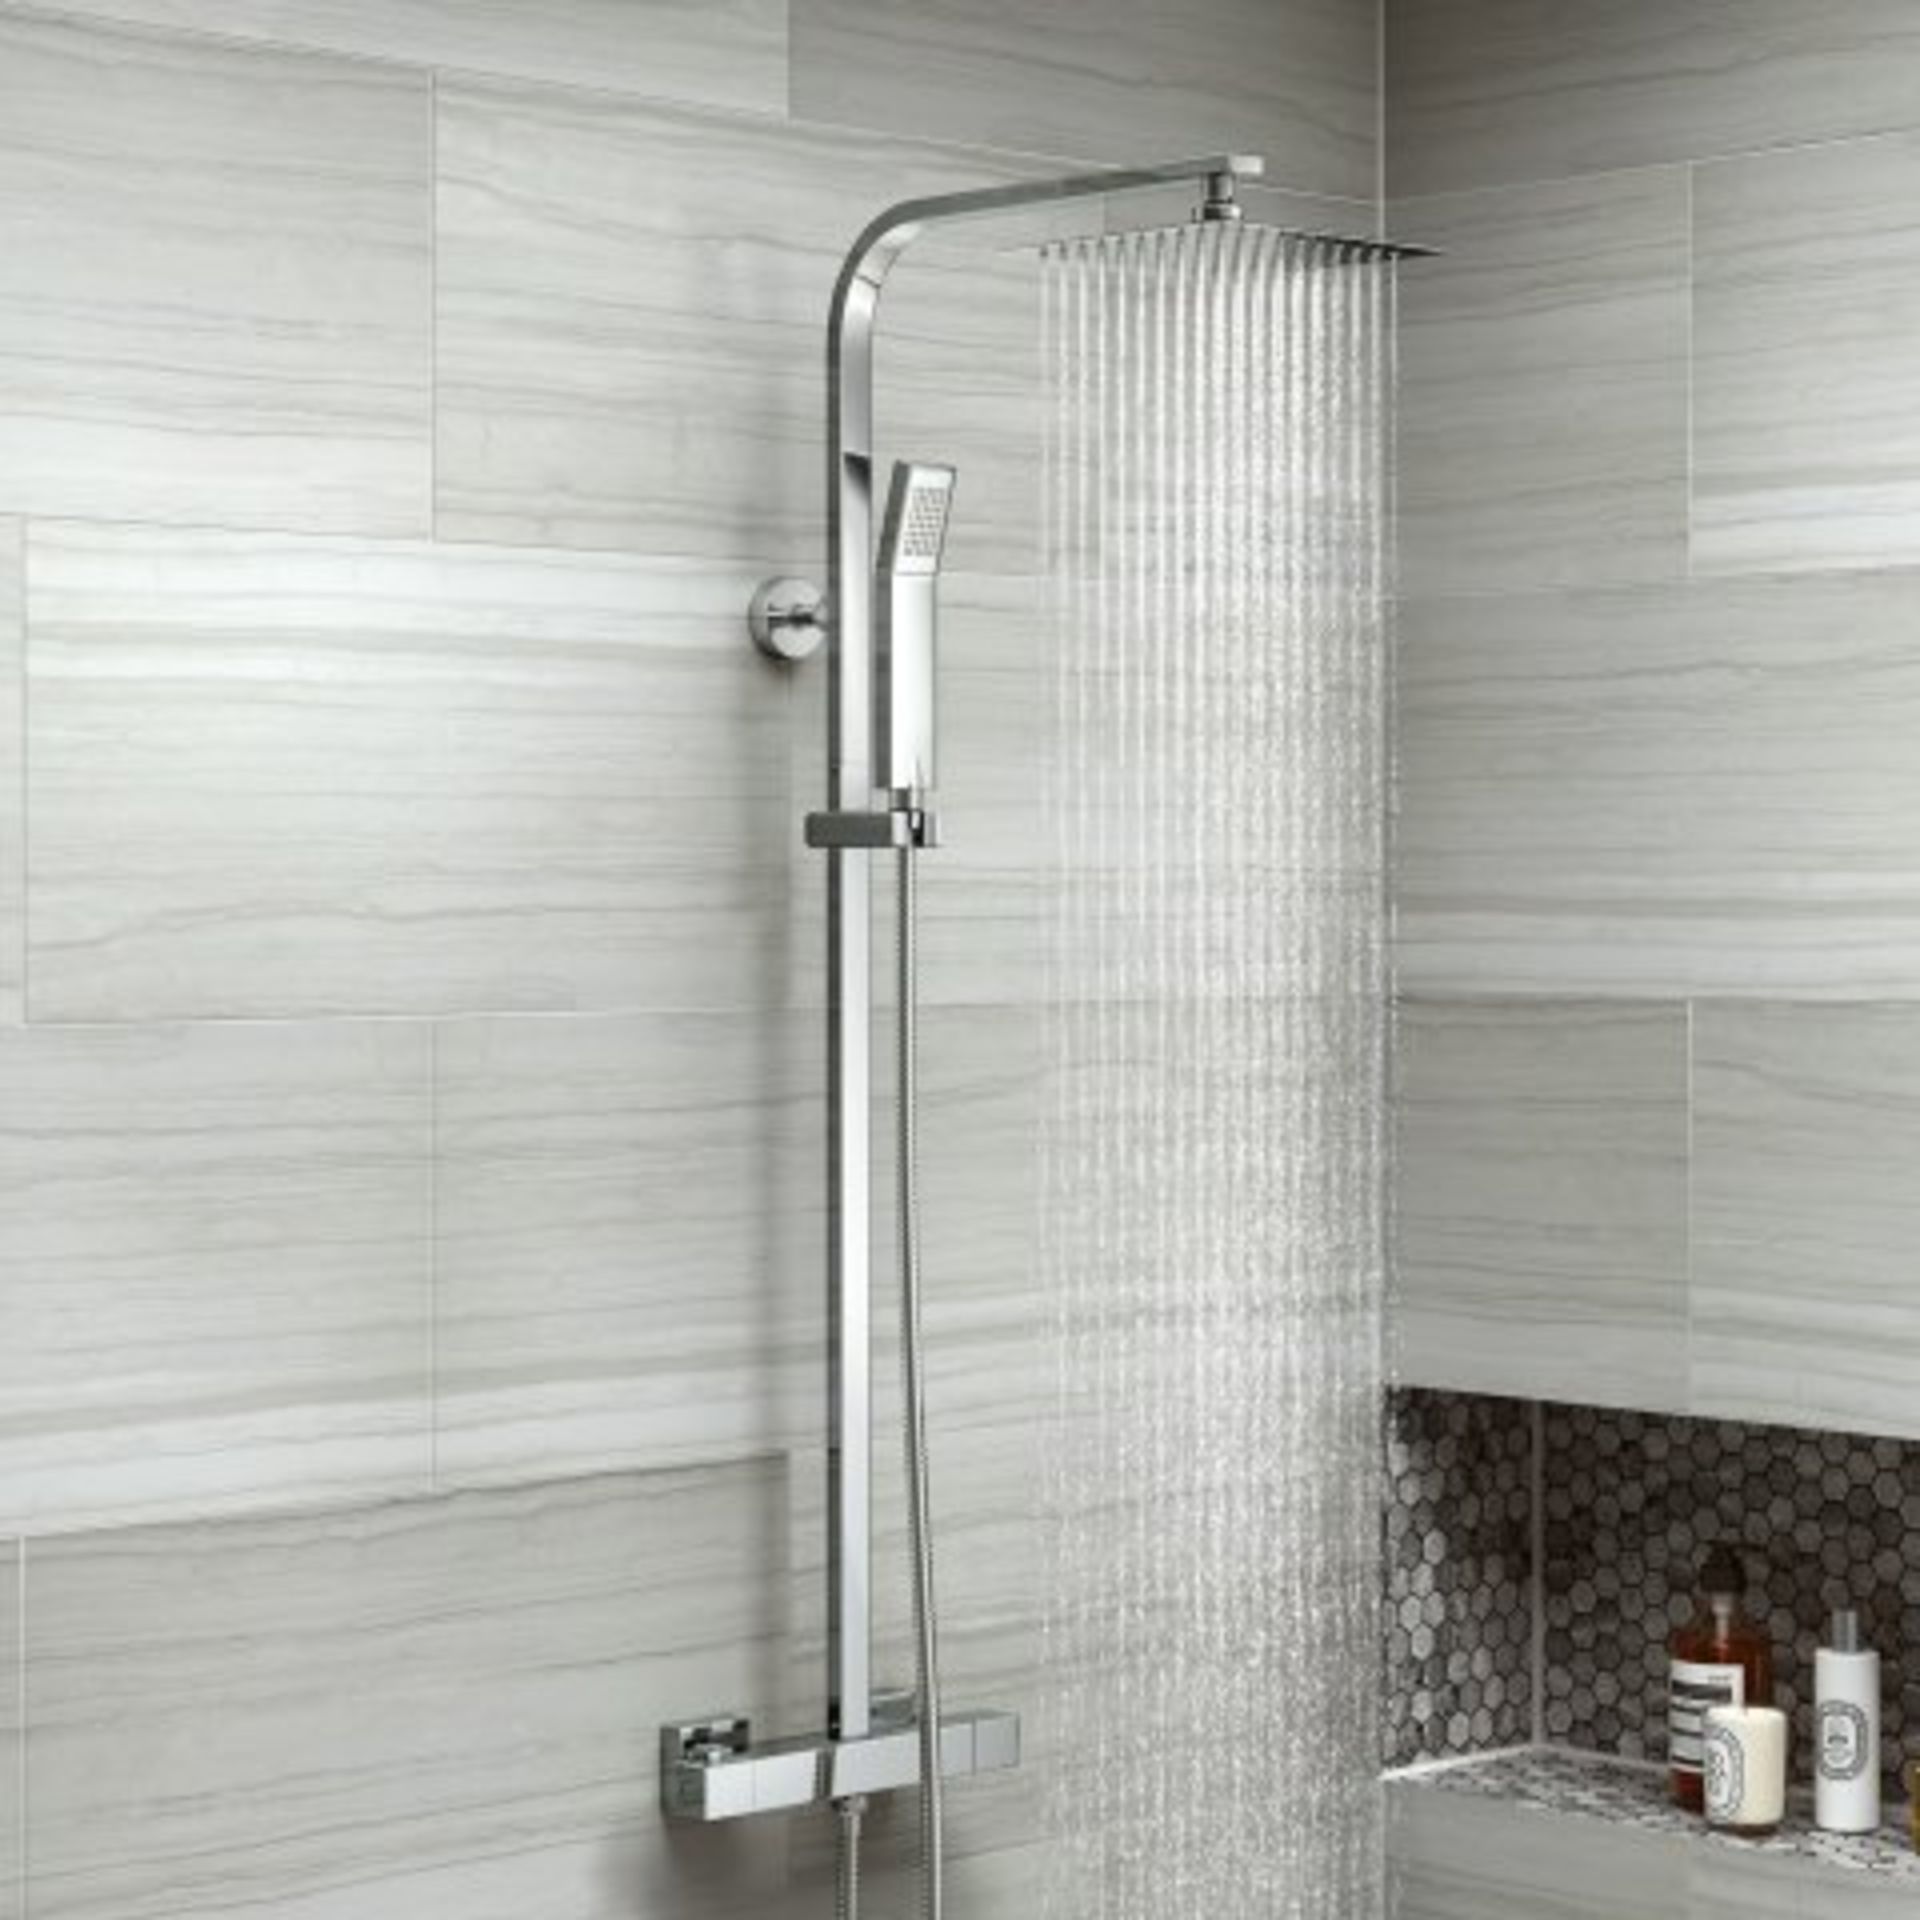 (A543) 200mm Square Head Thermostatic Exposed Shower Kit. RRP £349.99. The straight lines and